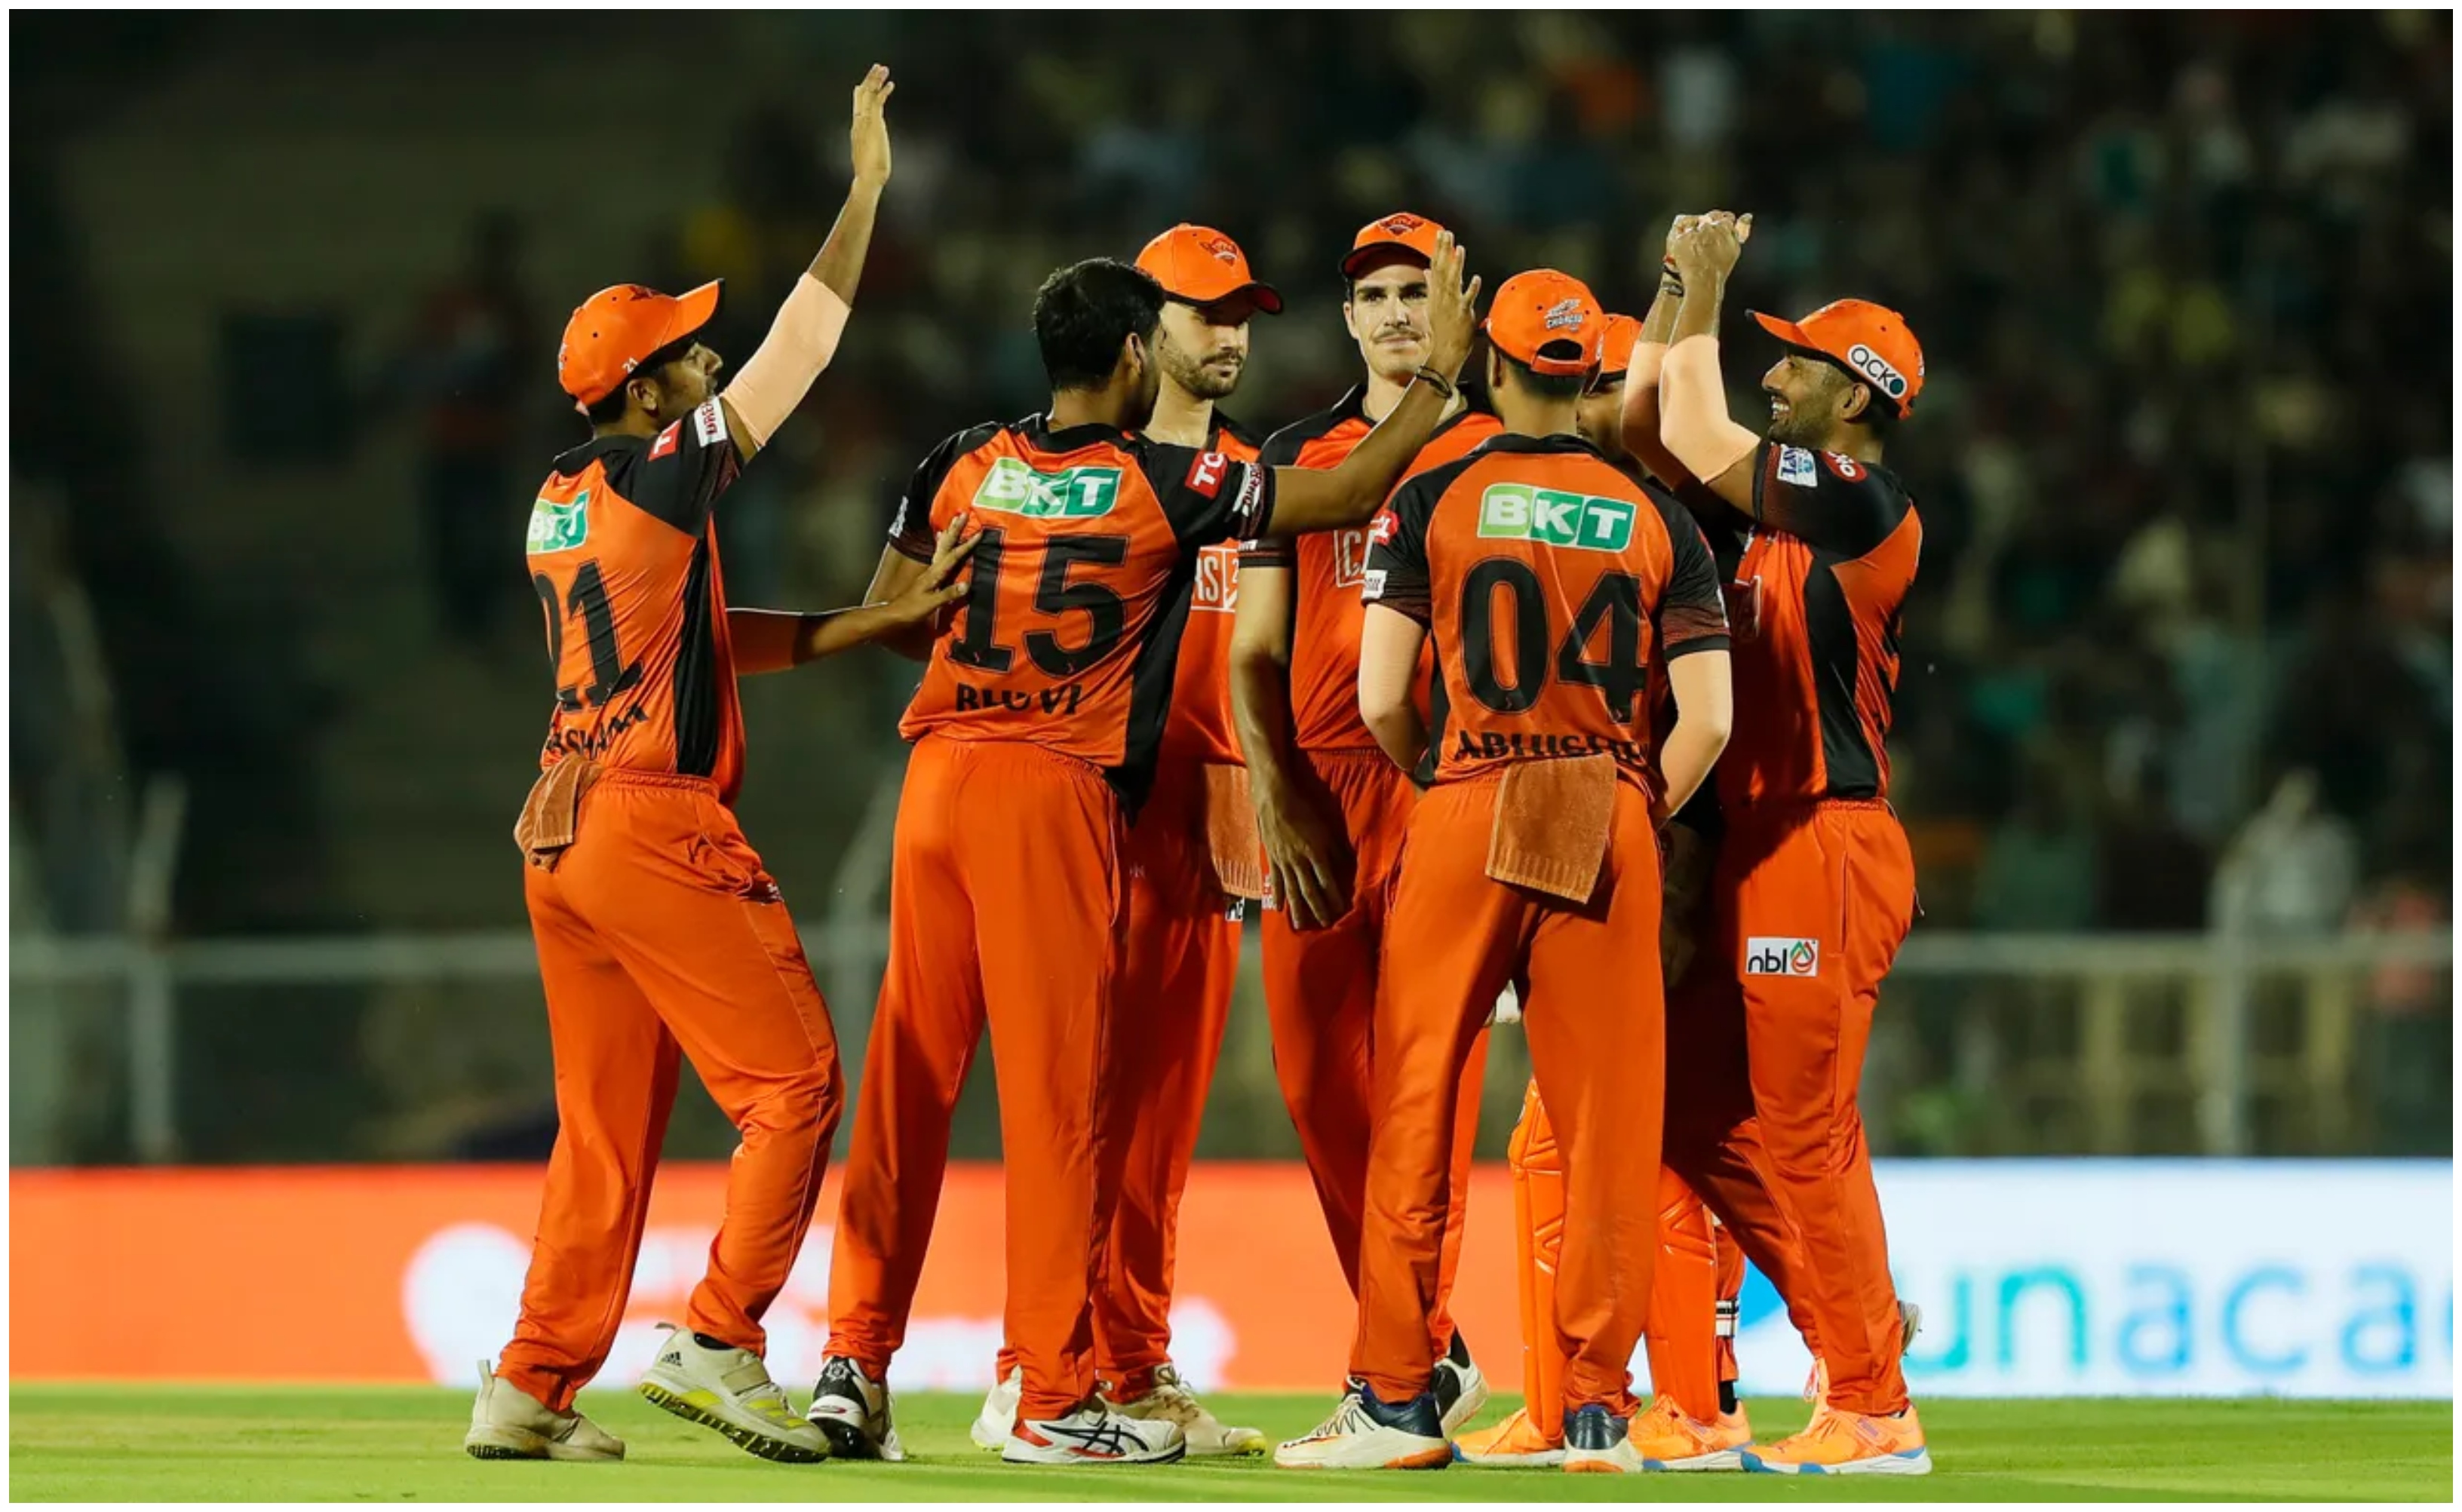 SRH were outplayed by DC | BCCI/IPL